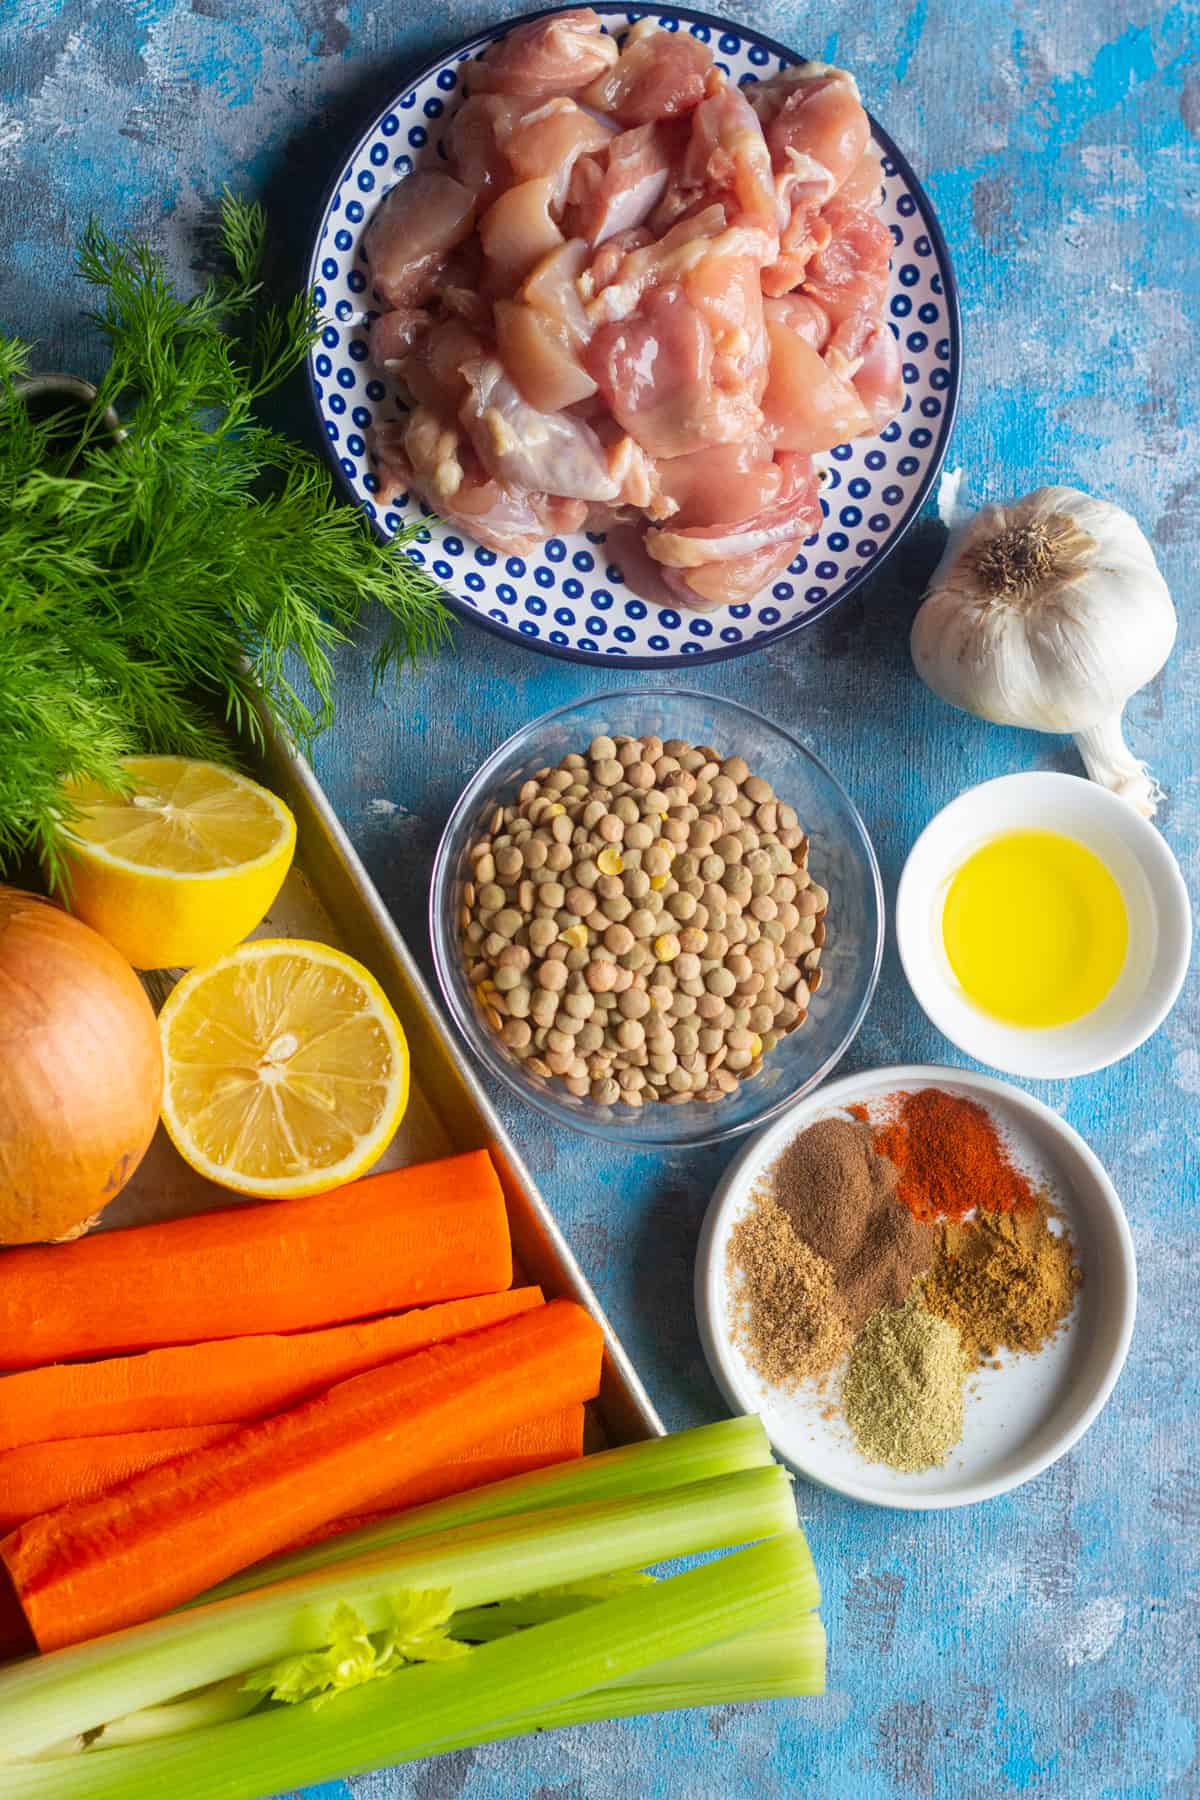 To make chicken lentil soup you need onion garlic, carrots, celery, chicken thighs, lentils and spices. 